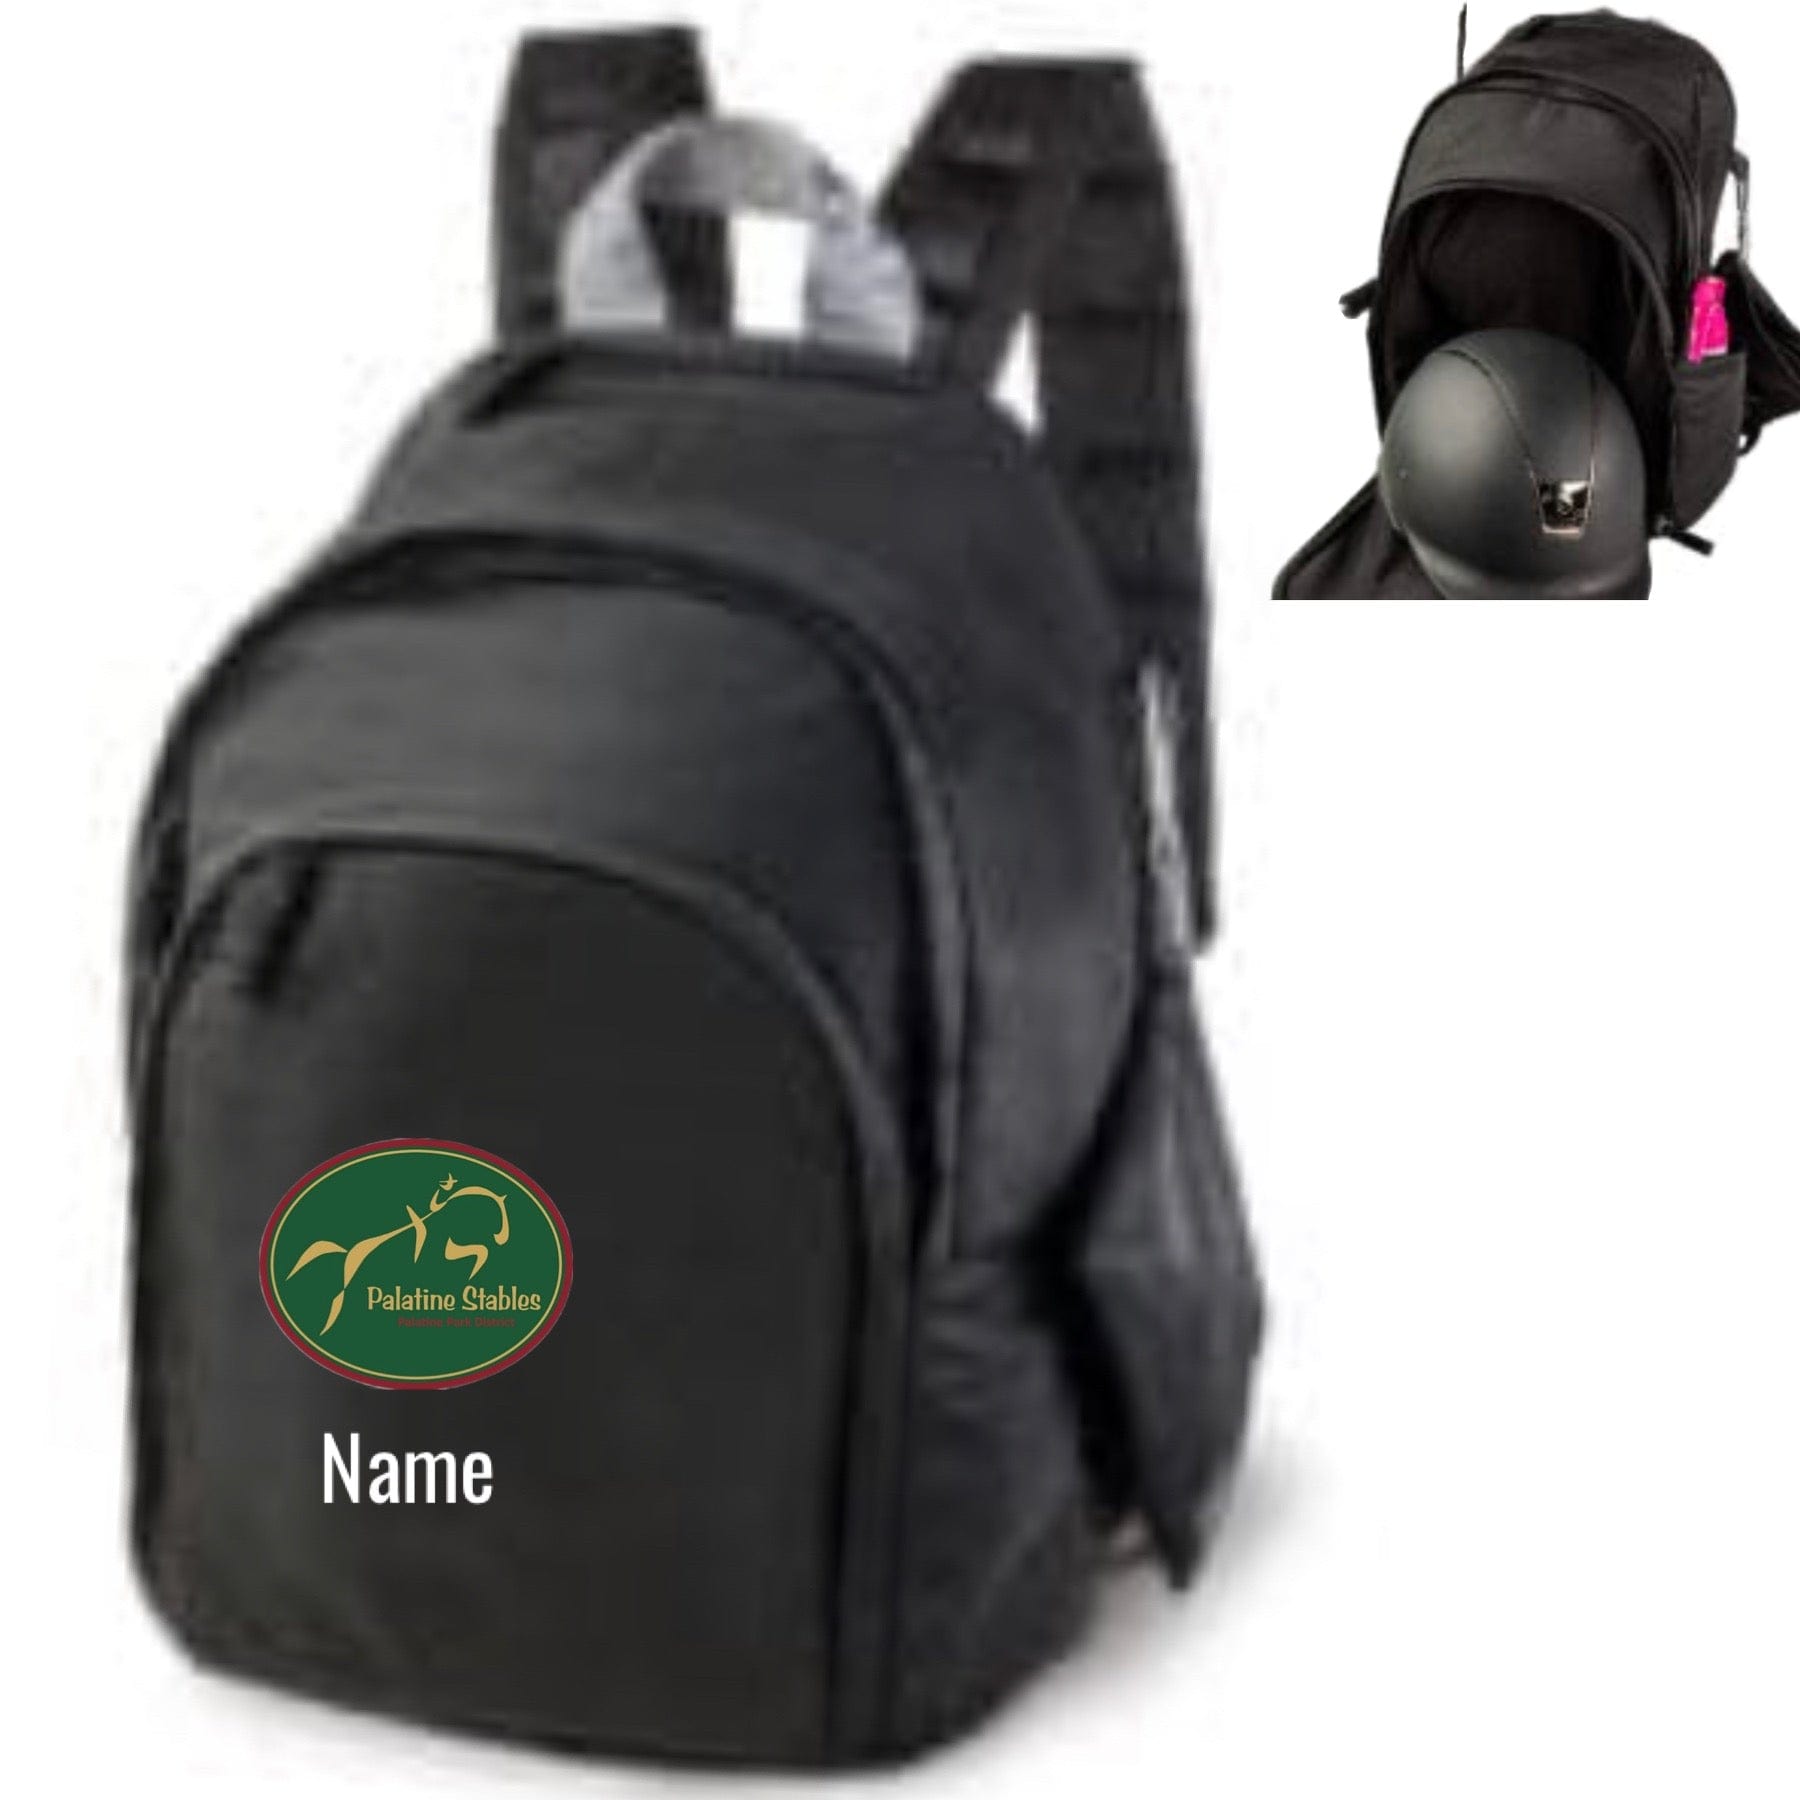 Equestrian Team Apparel Palatine Stables Backpacks equestrian team apparel online tack store mobile tack store custom farm apparel custom show stable clothing equestrian lifestyle horse show clothing riding clothes horses equestrian tack store